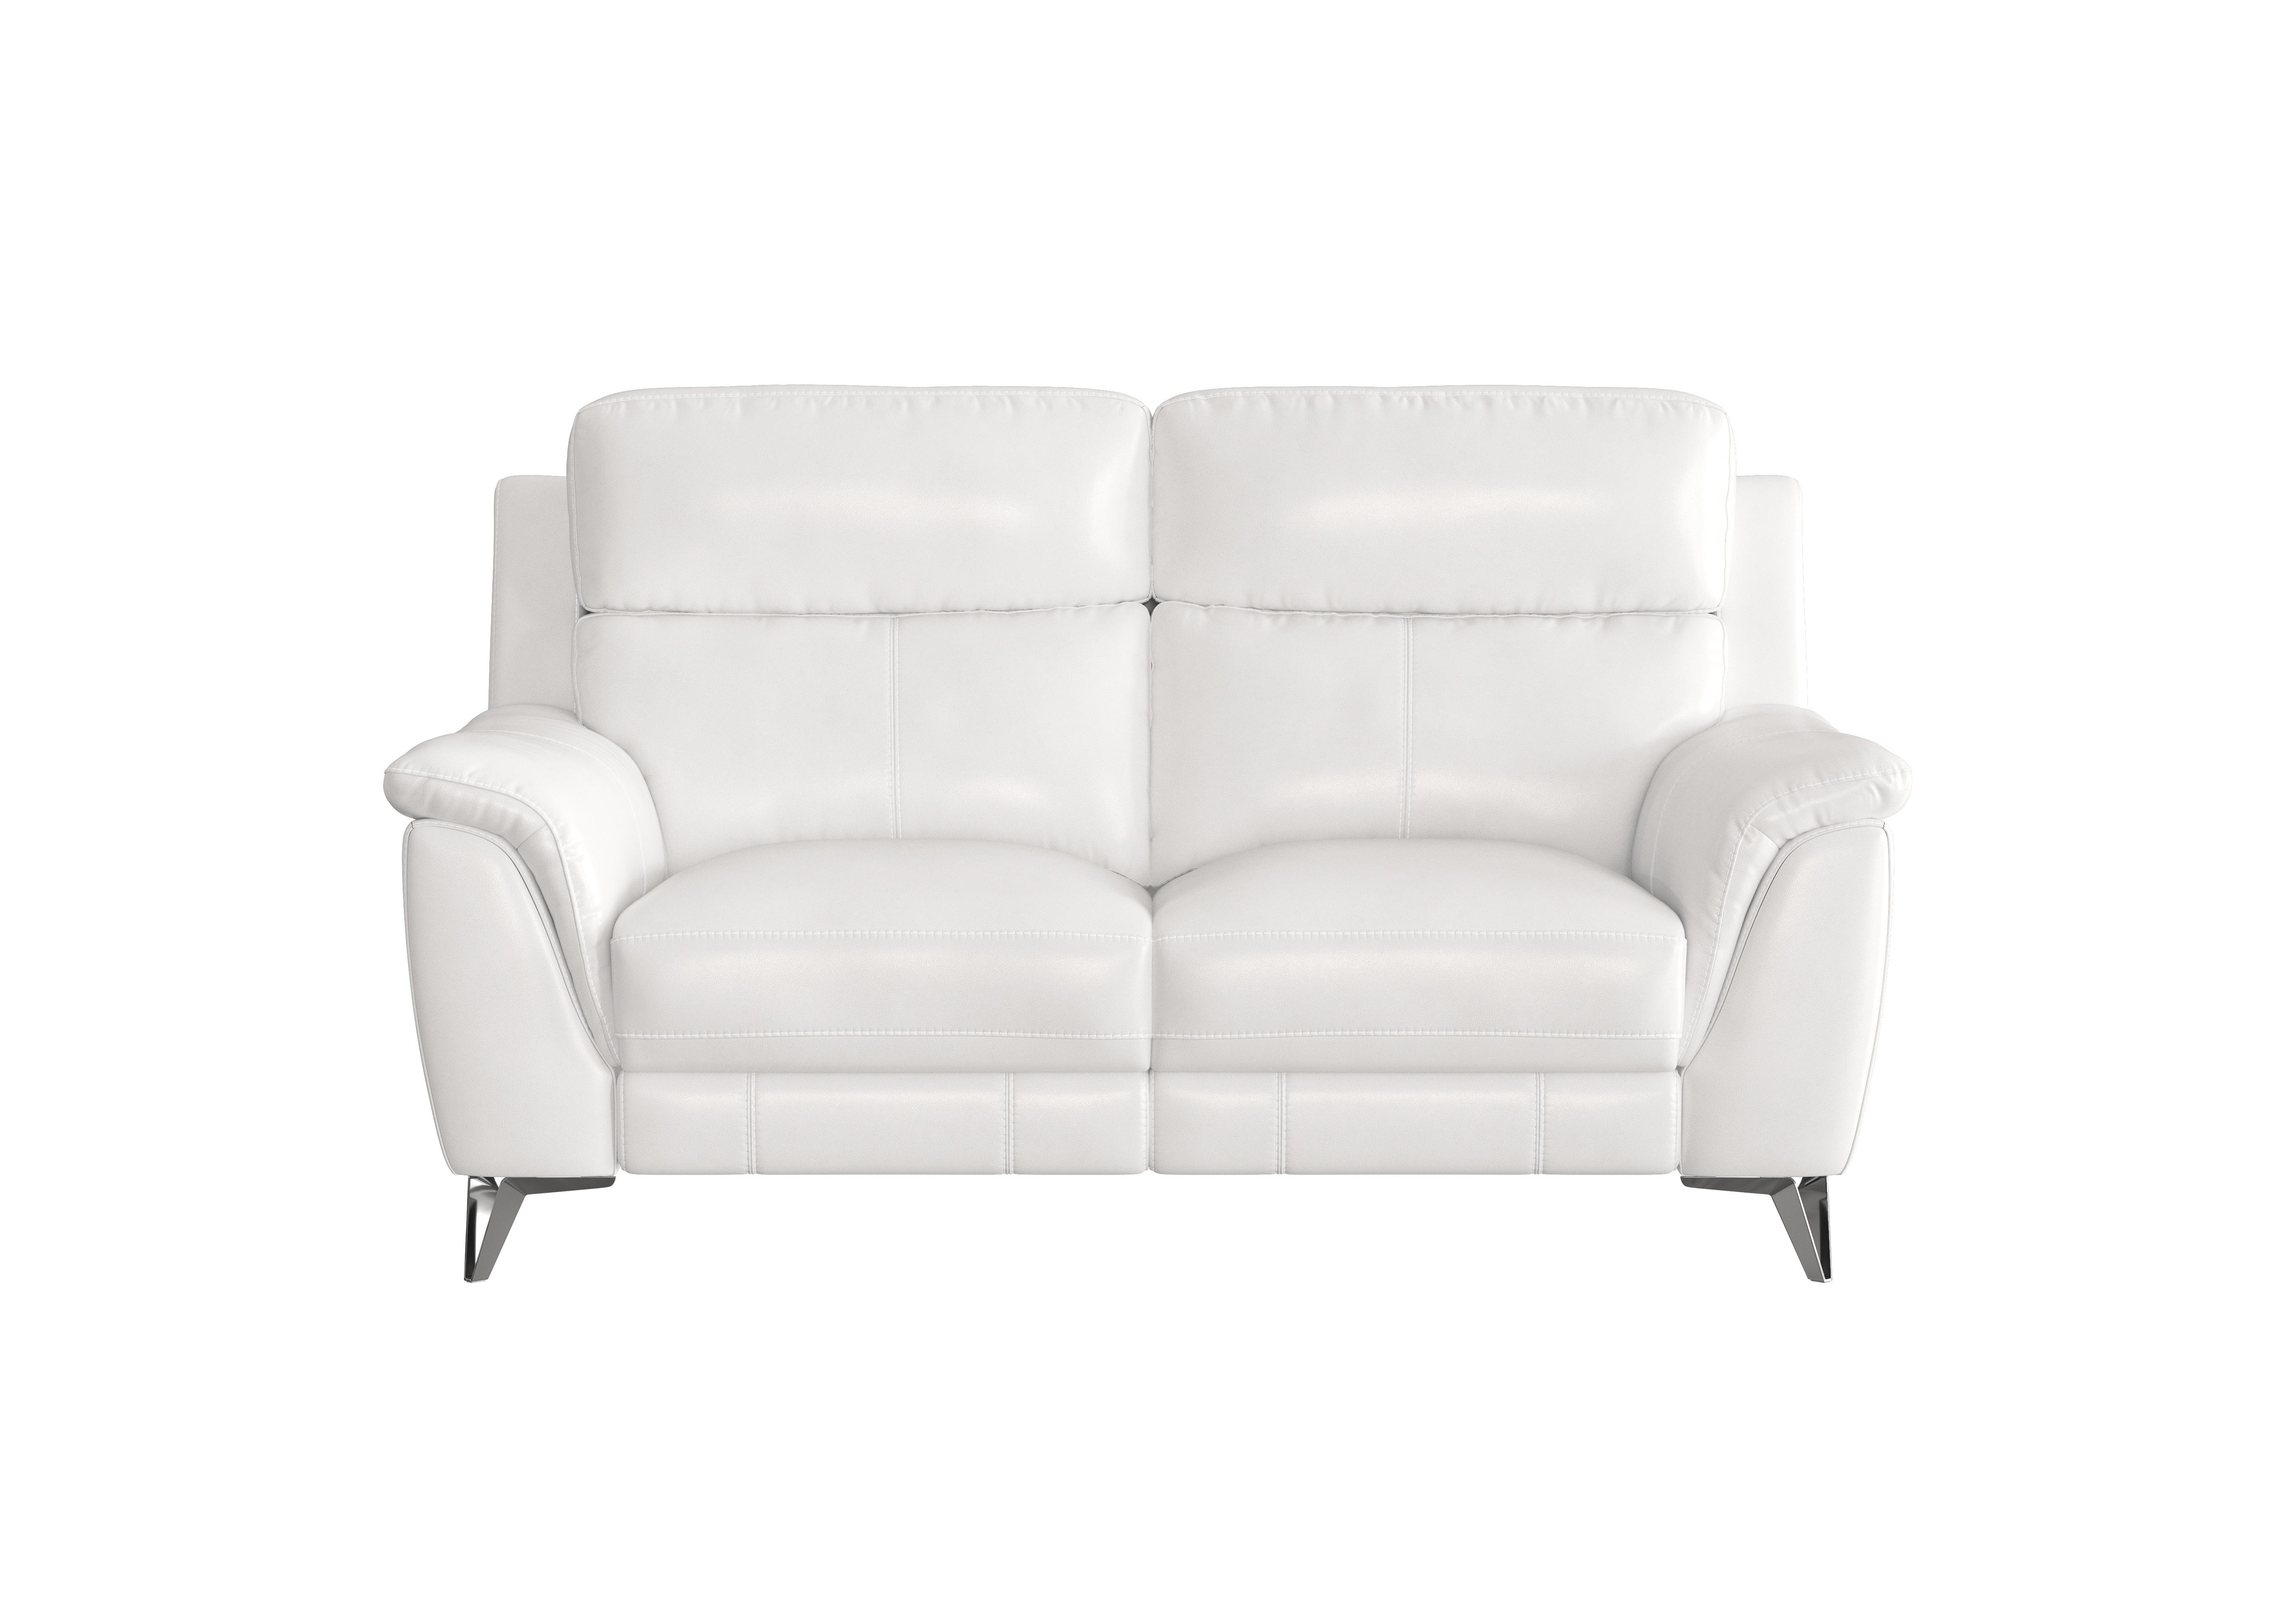 Contempo 2 Seater Leather Sofa in Bv-744d Star White on Furniture Village